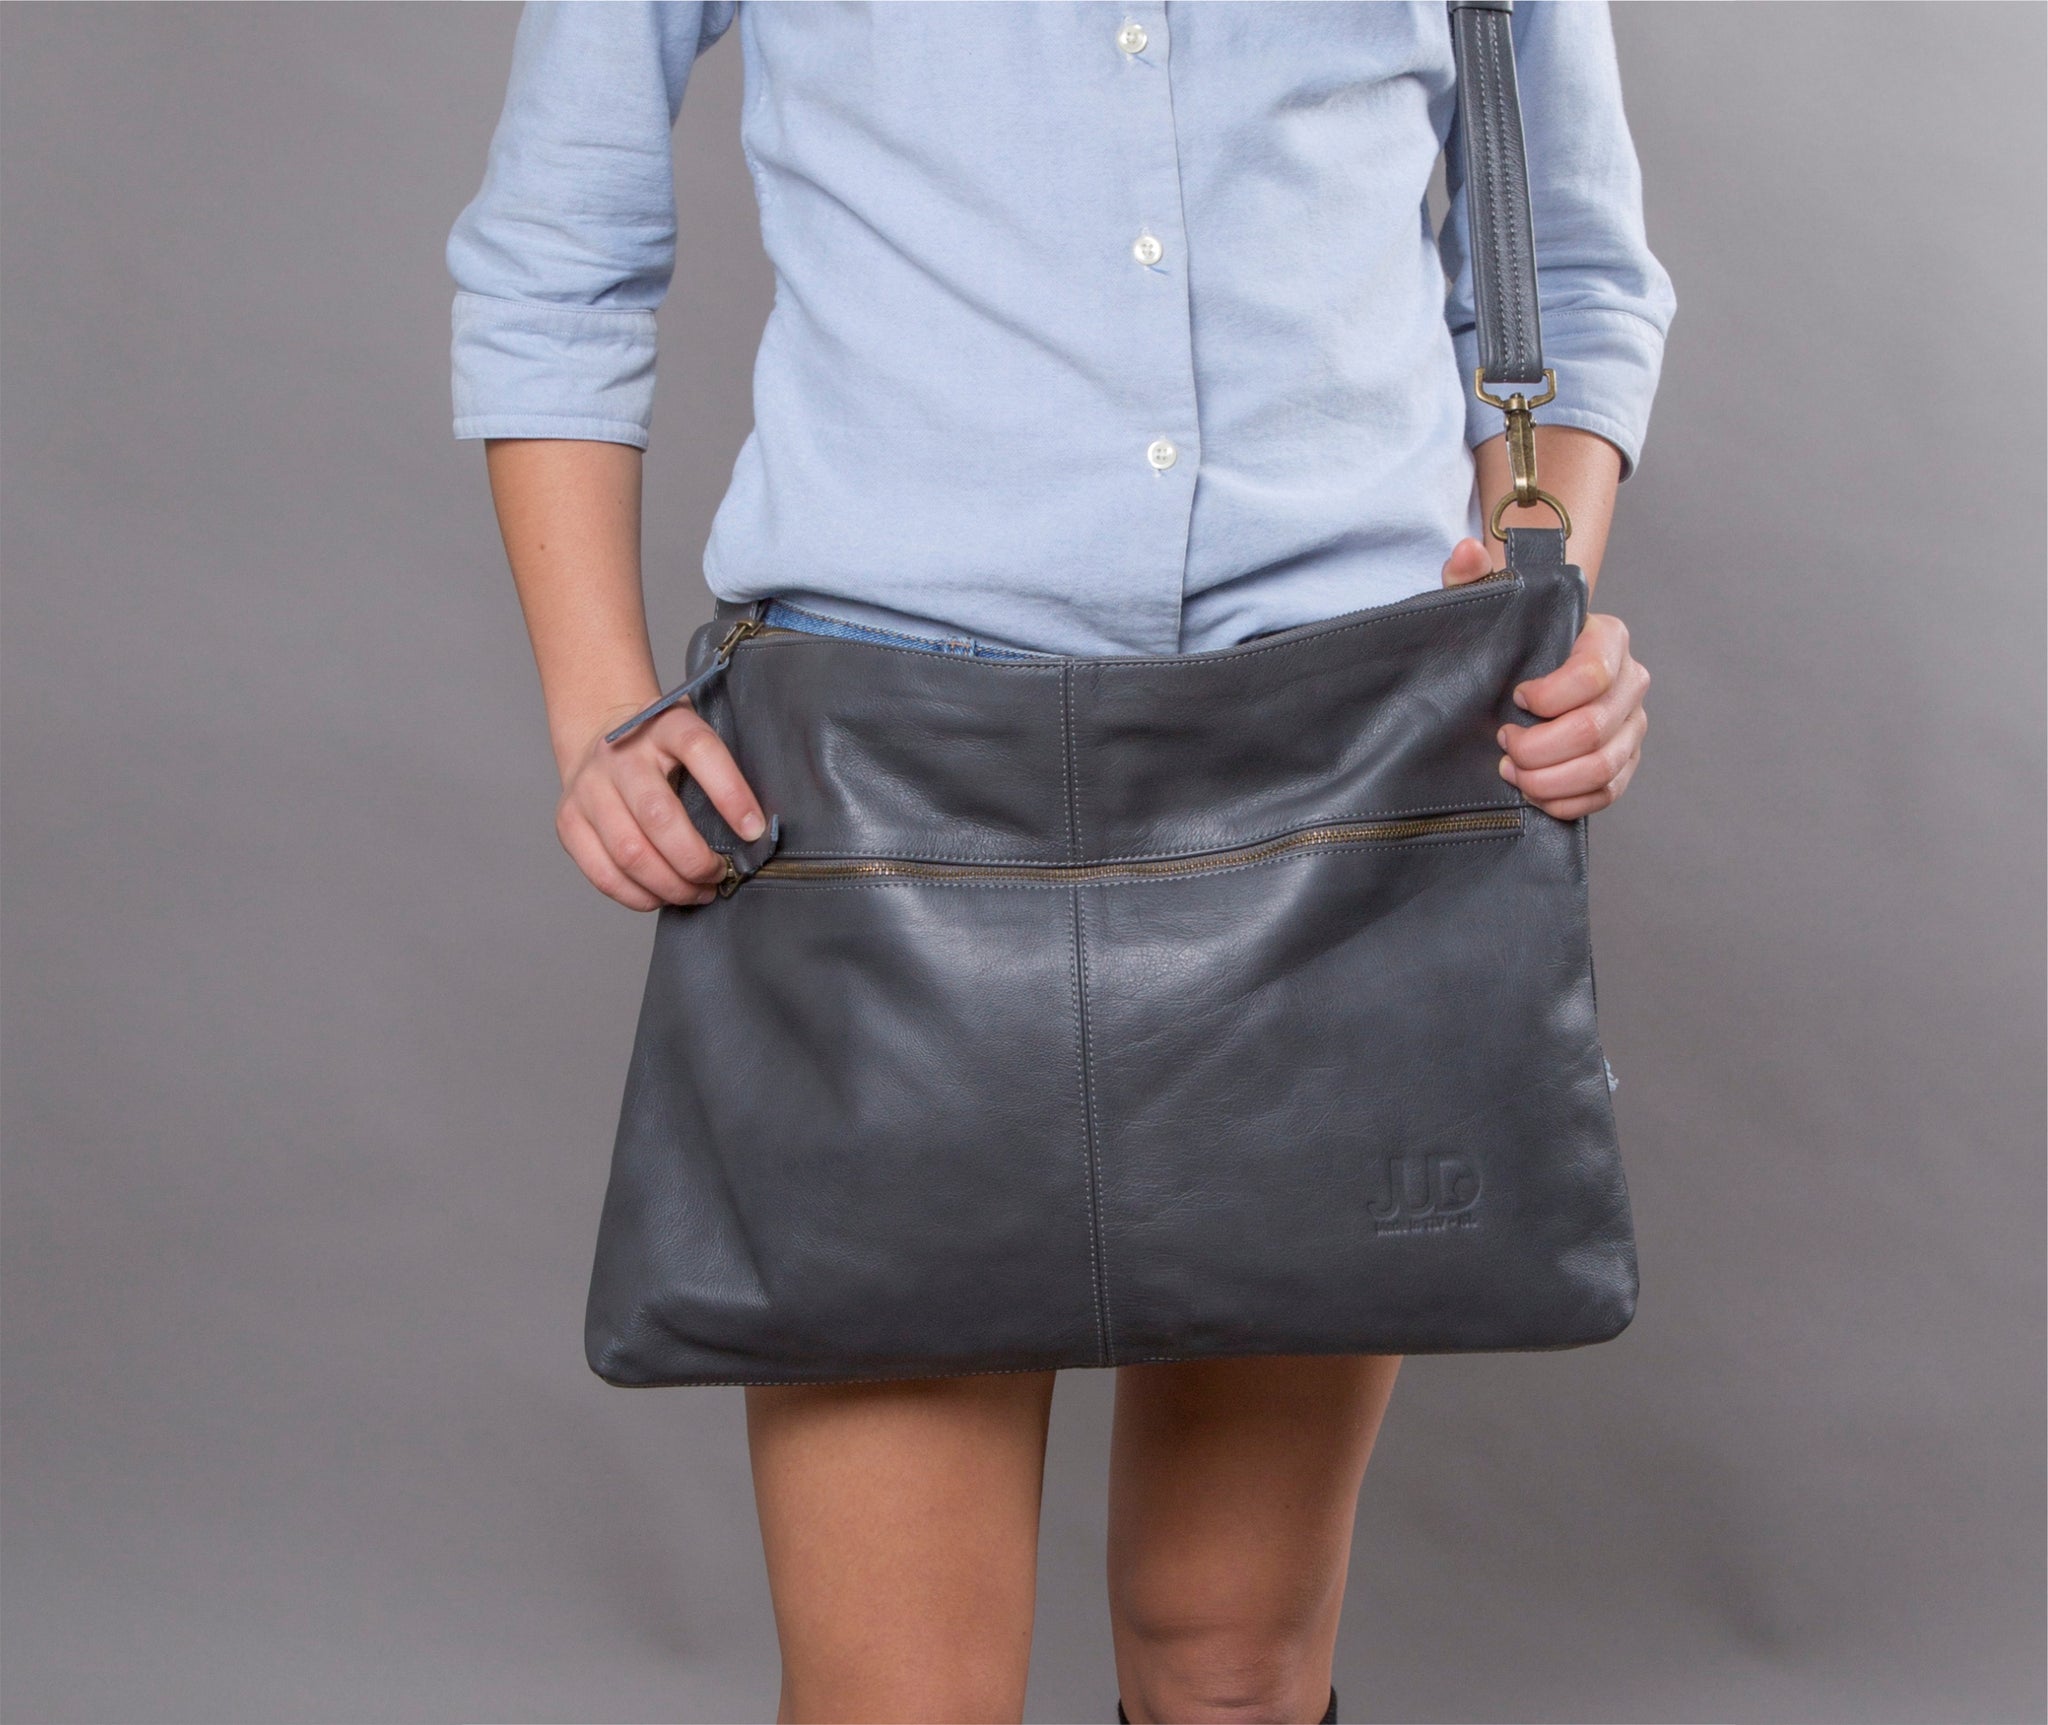 gray designer messenger bag handmade with soft Italian Napa leather suitable for laptops up to 17in with adjustable & detachable matching leather strap can be carries as a crossbody bag, shoulder bag, oversized clutch